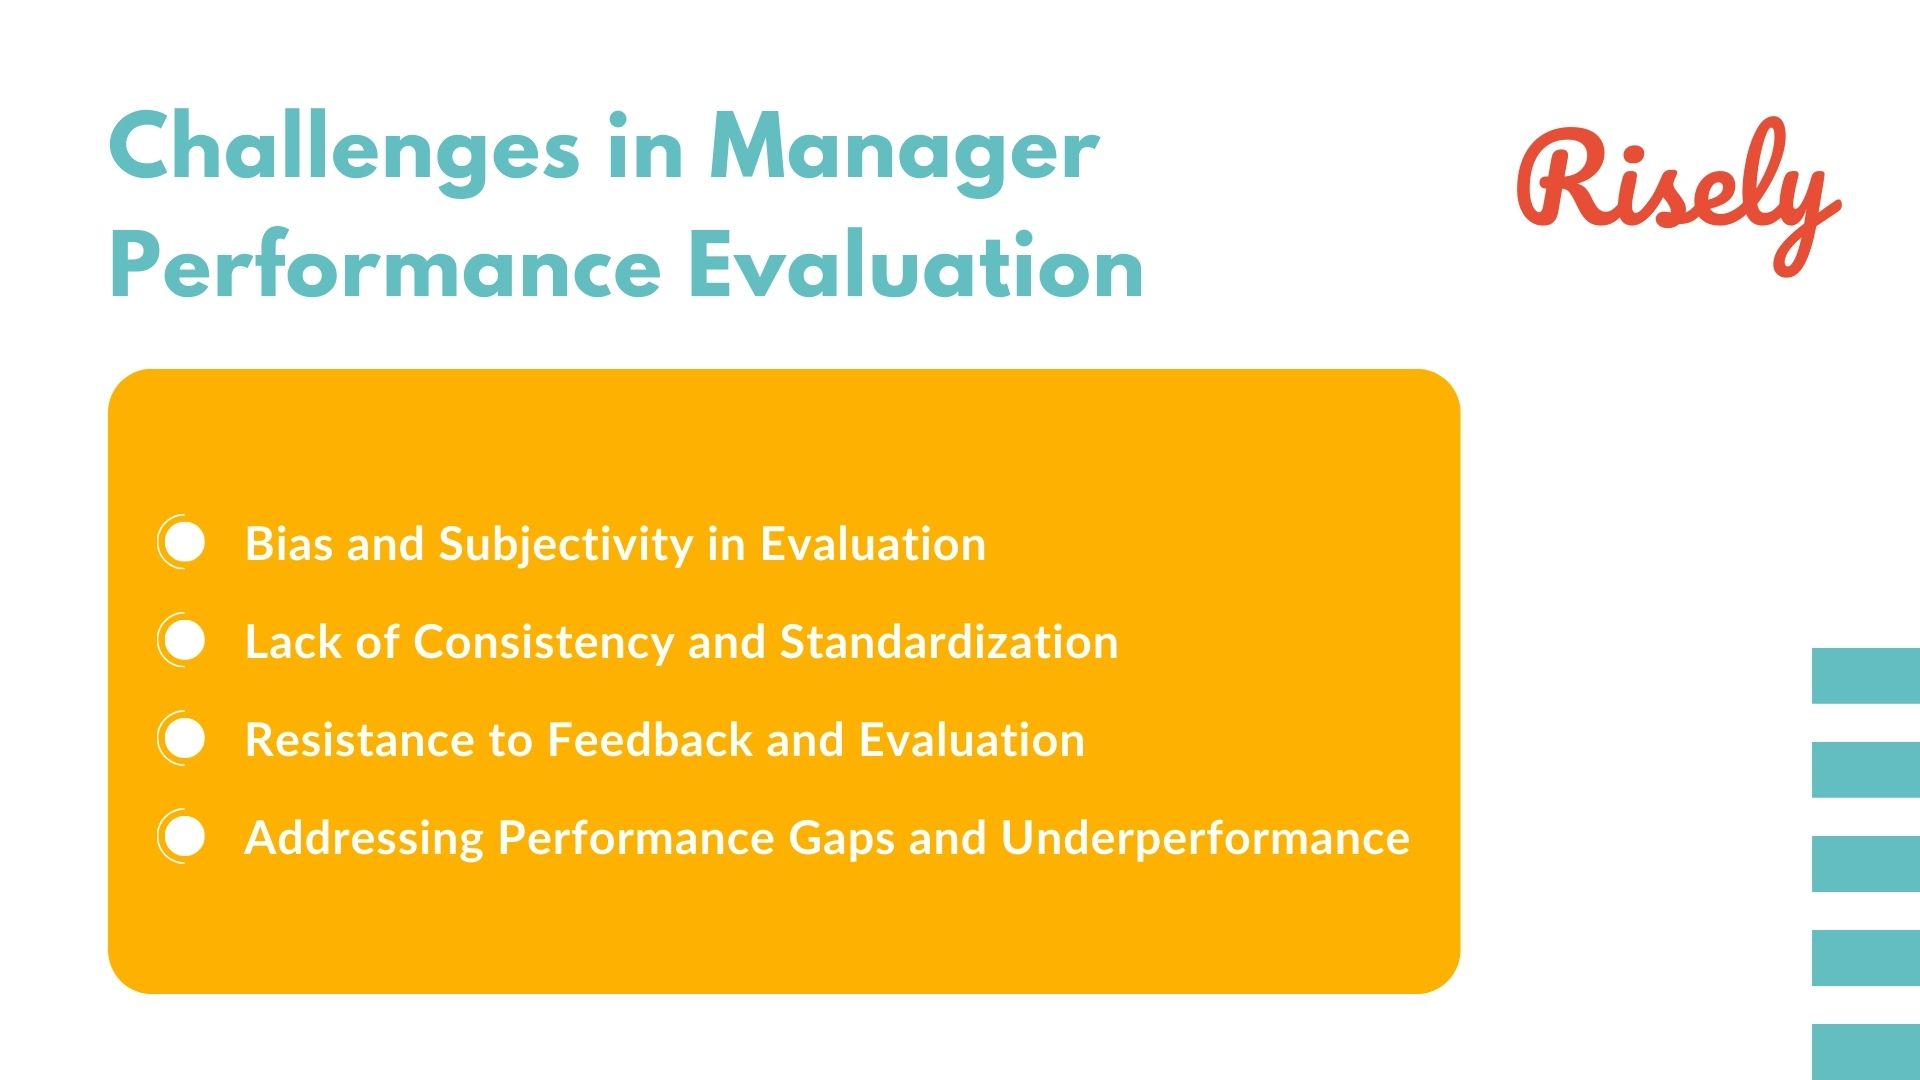 Challenges in Manager Performance Evaluation